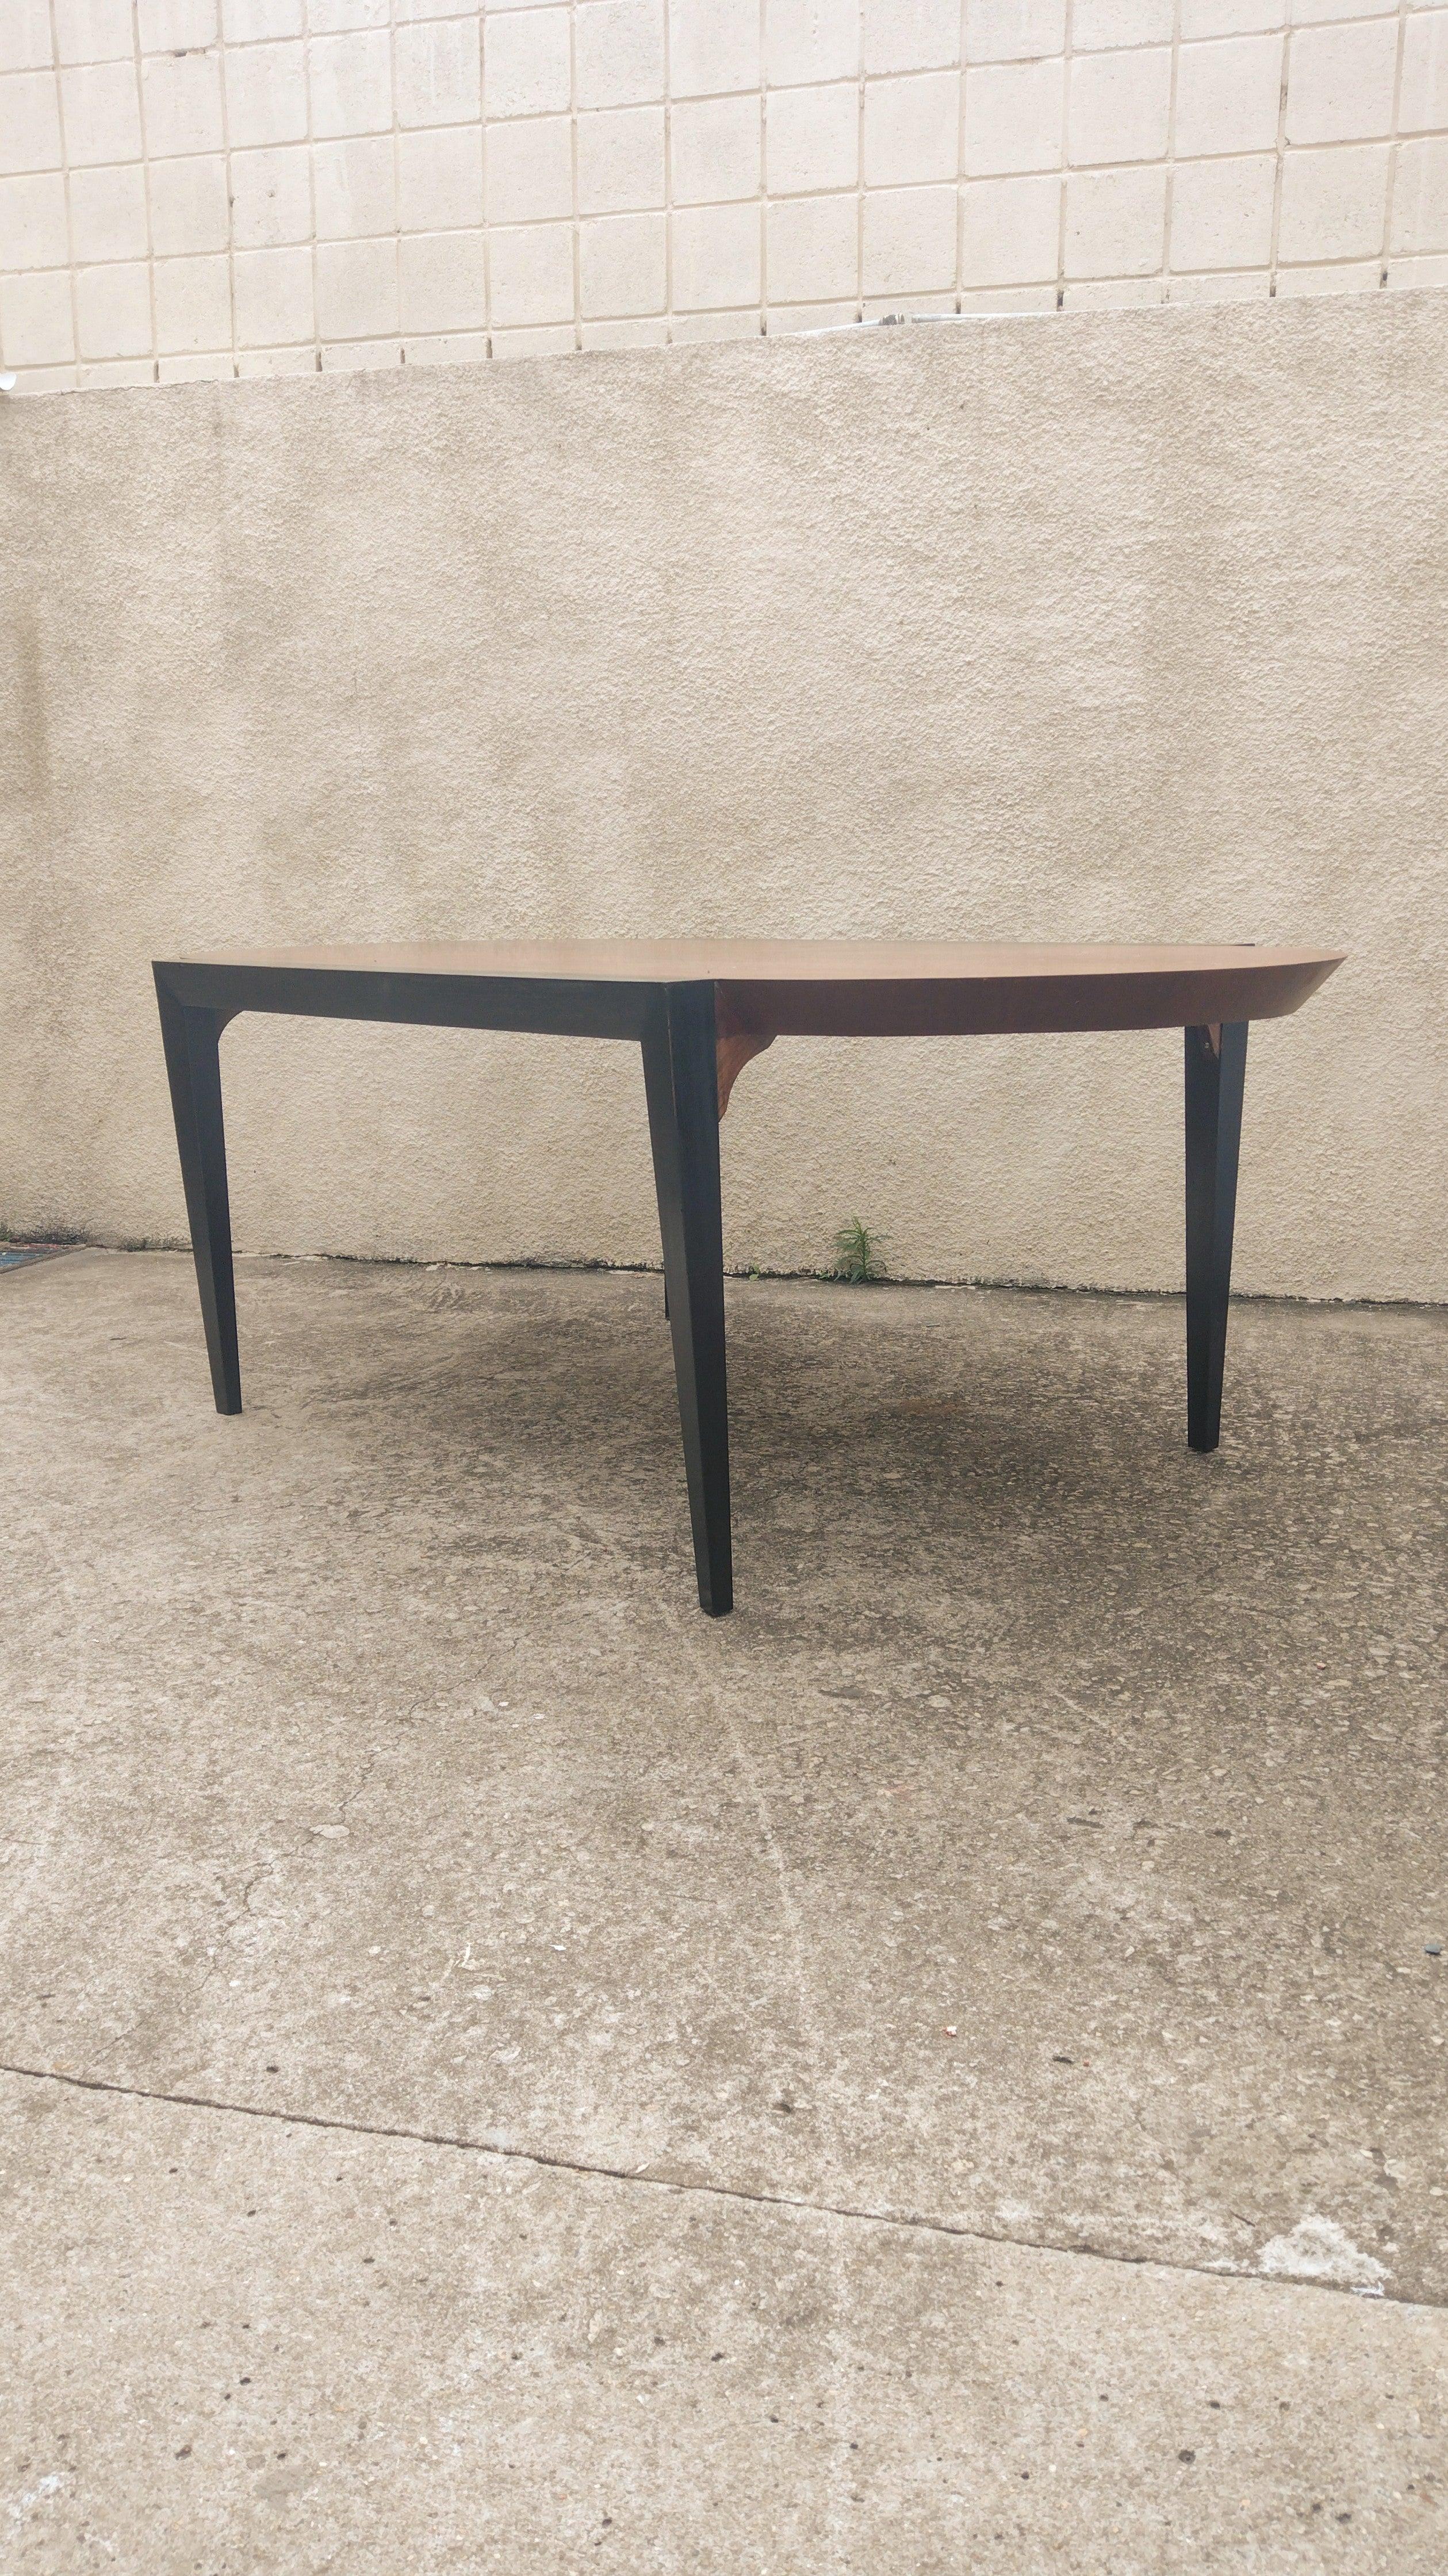 Mid-century Brazilian oval table in solid wood and cherry veneer. Firm and resistant. in Good condition

Approximate Measures:
Height: 75cm / Width: 212cm / Depth: 110cm

Usable Height (chair fit): 69cm
Usable Width (between the legs):